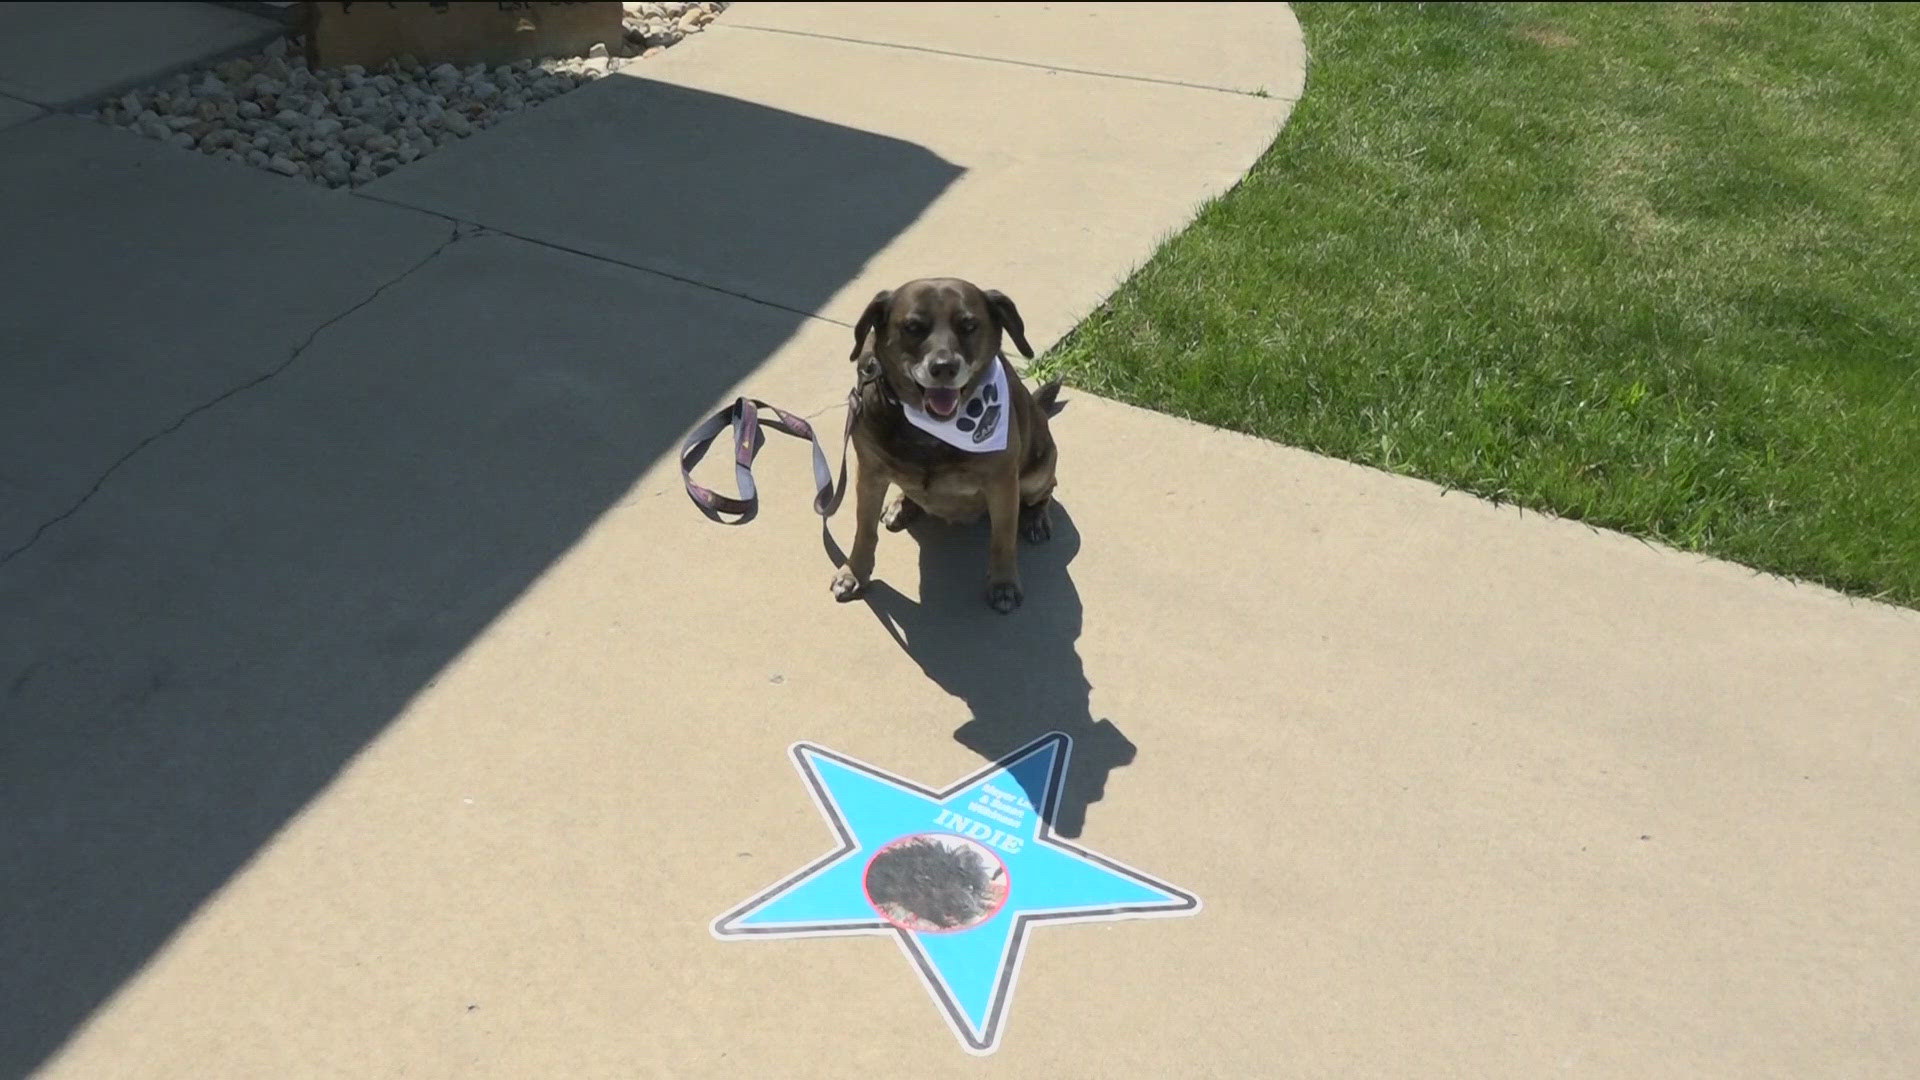 The Tiffin Pet Walk of Fame will be on display for the month of July and serves as a fundraiser for repairs to the Seneca County Humane Society.